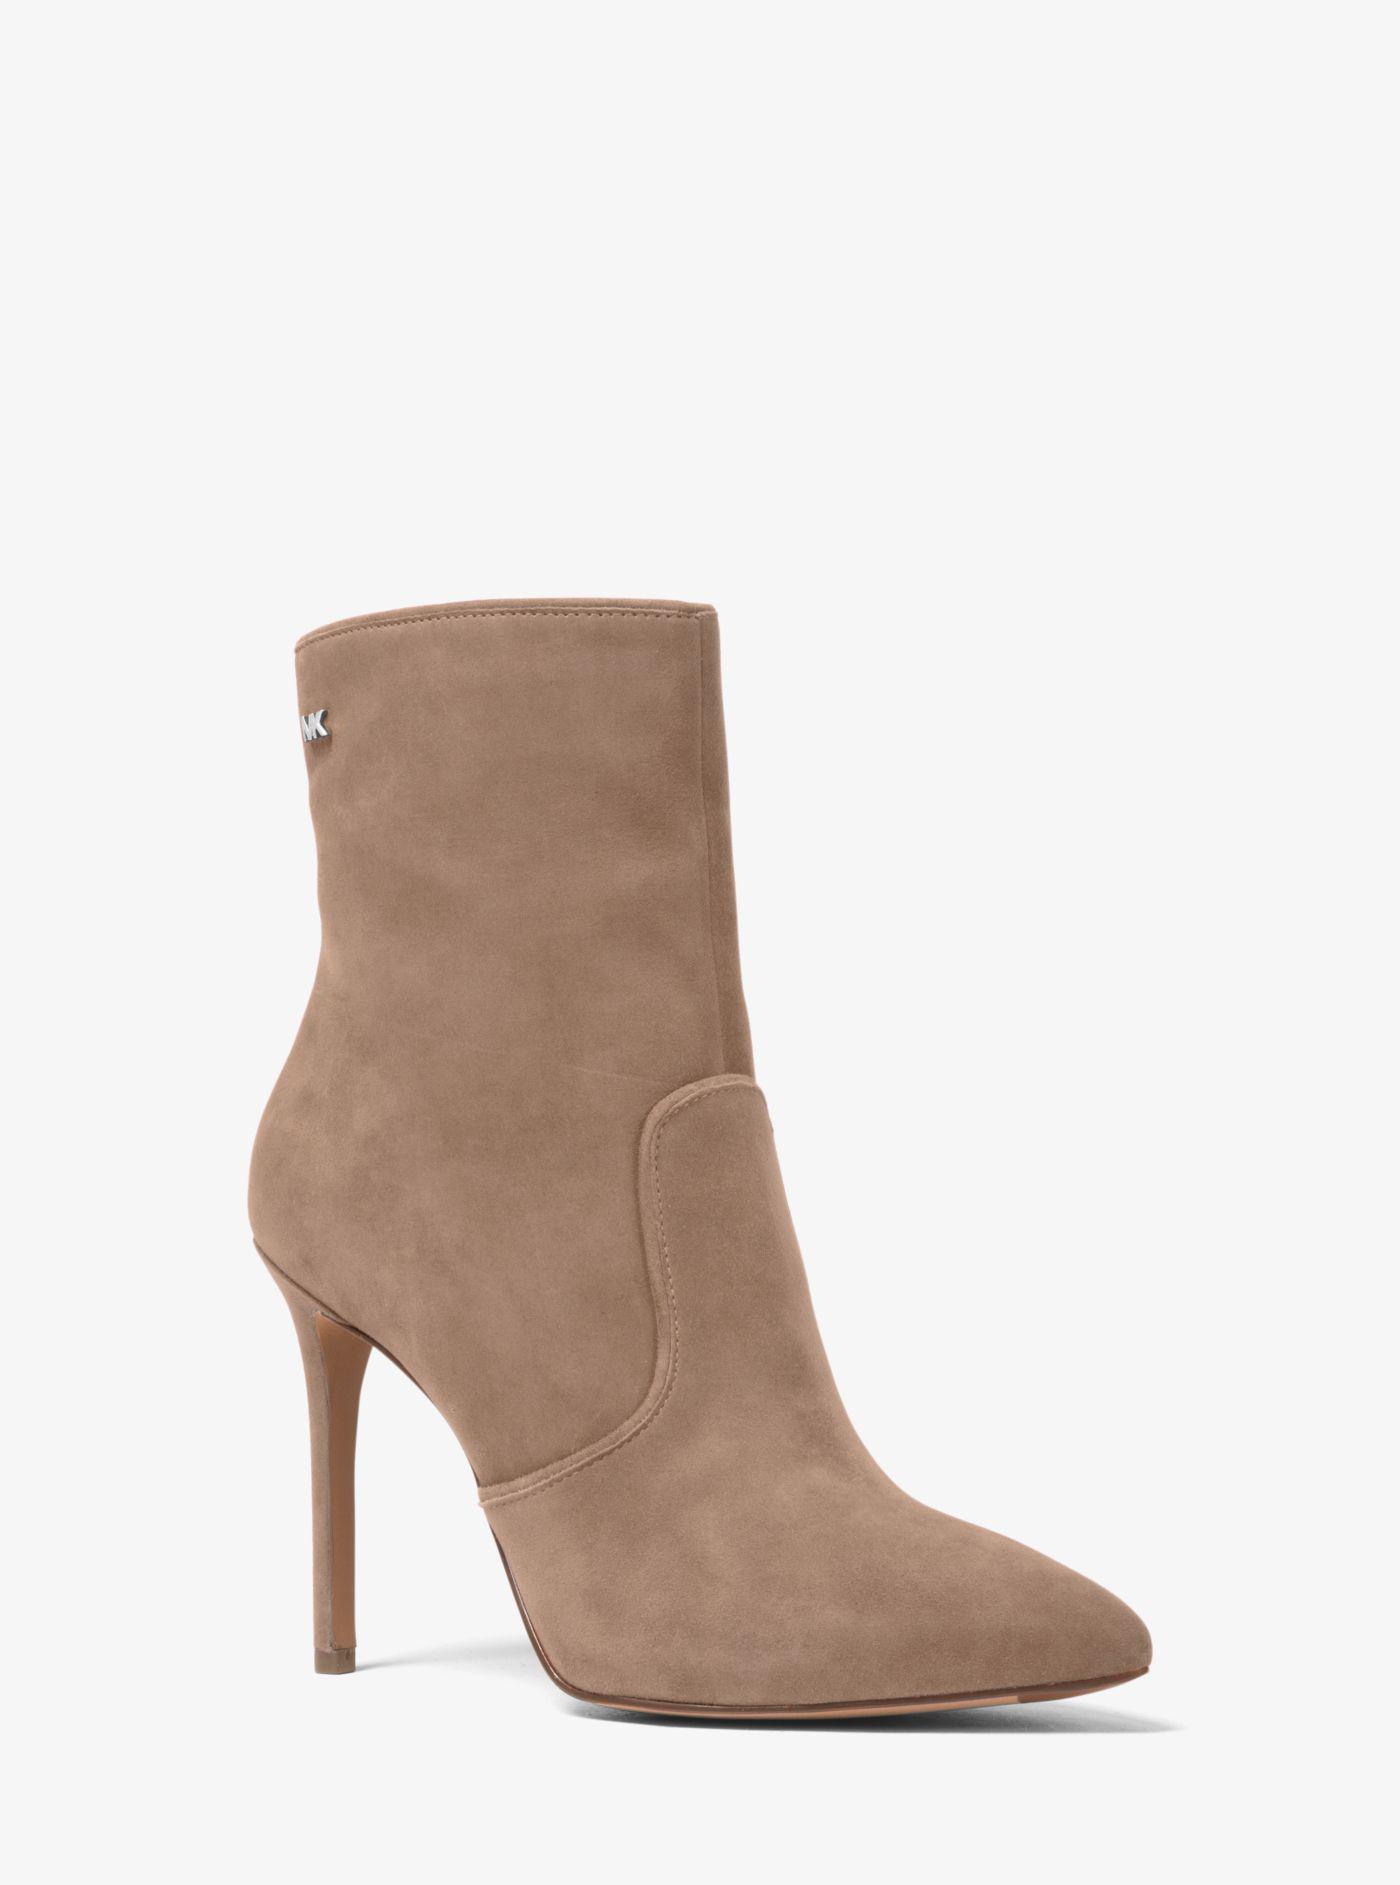 Michael Kors Blaine Suede Ankle Boot in 